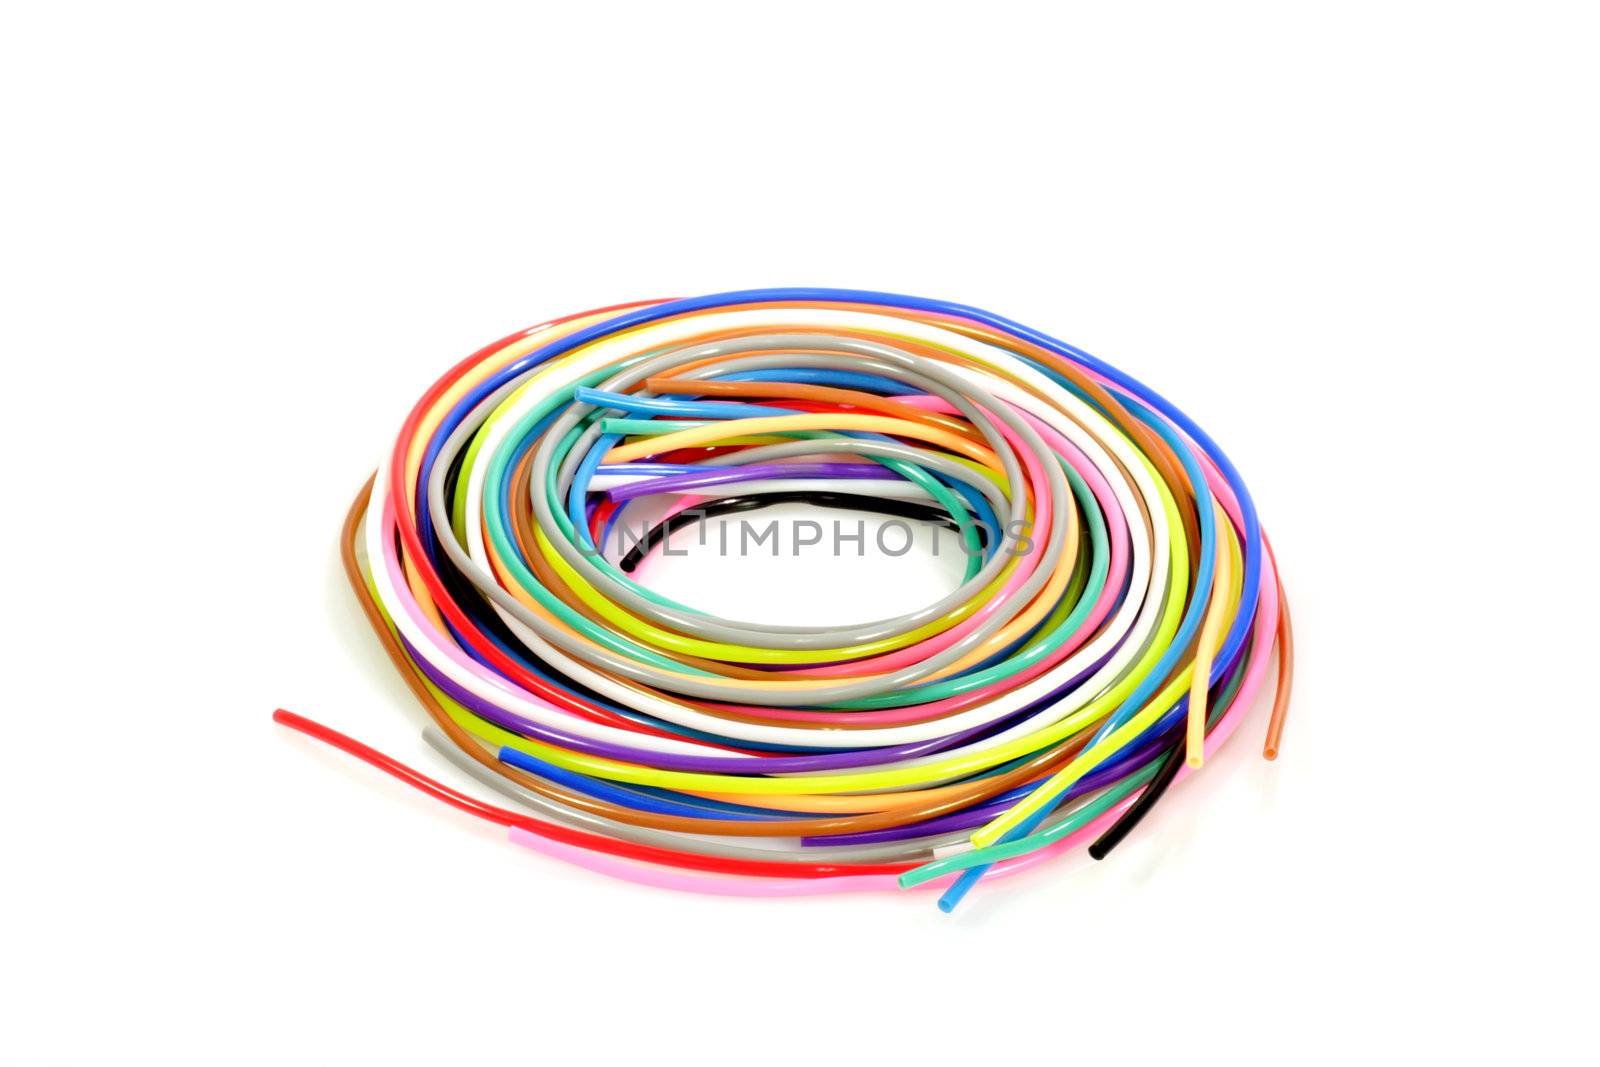 Colorful plastic bands on white background